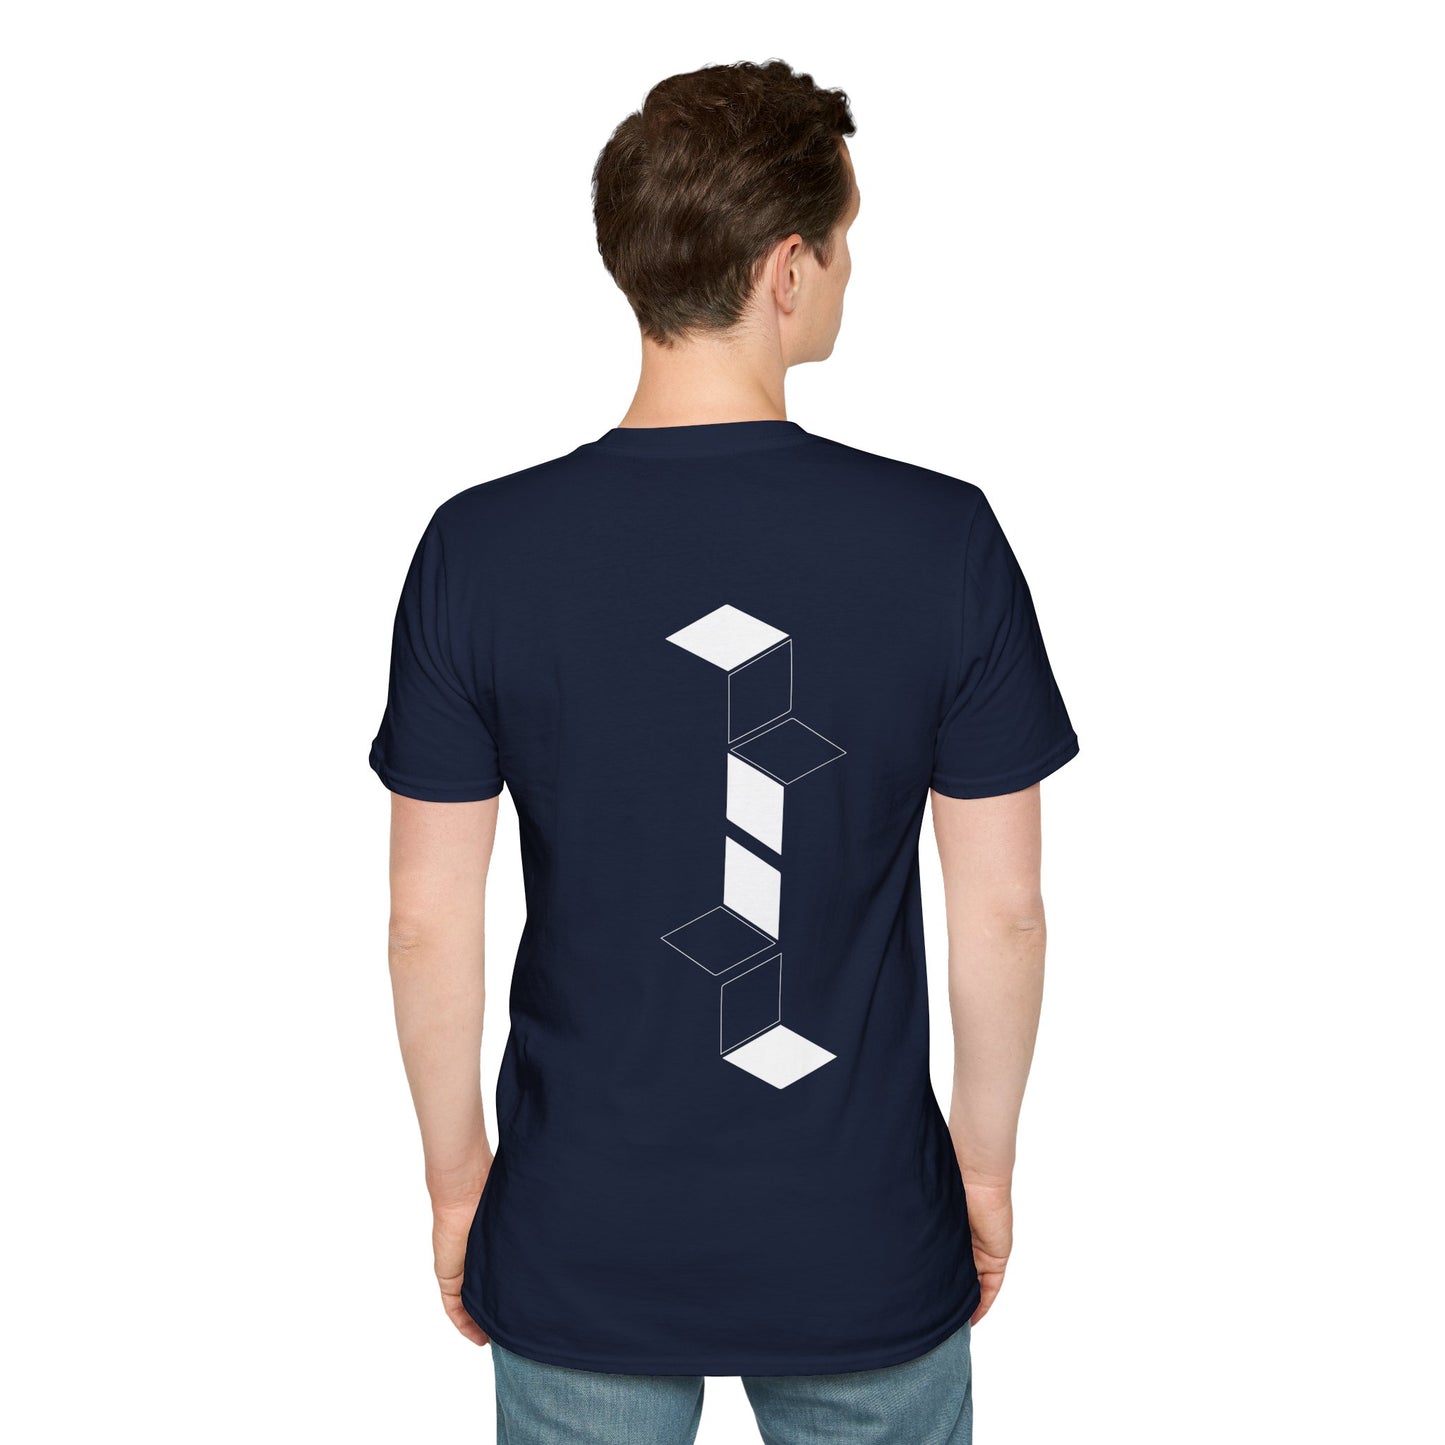 Navy T-shirt with white geometric cube pattern creating a 3D optical illusion